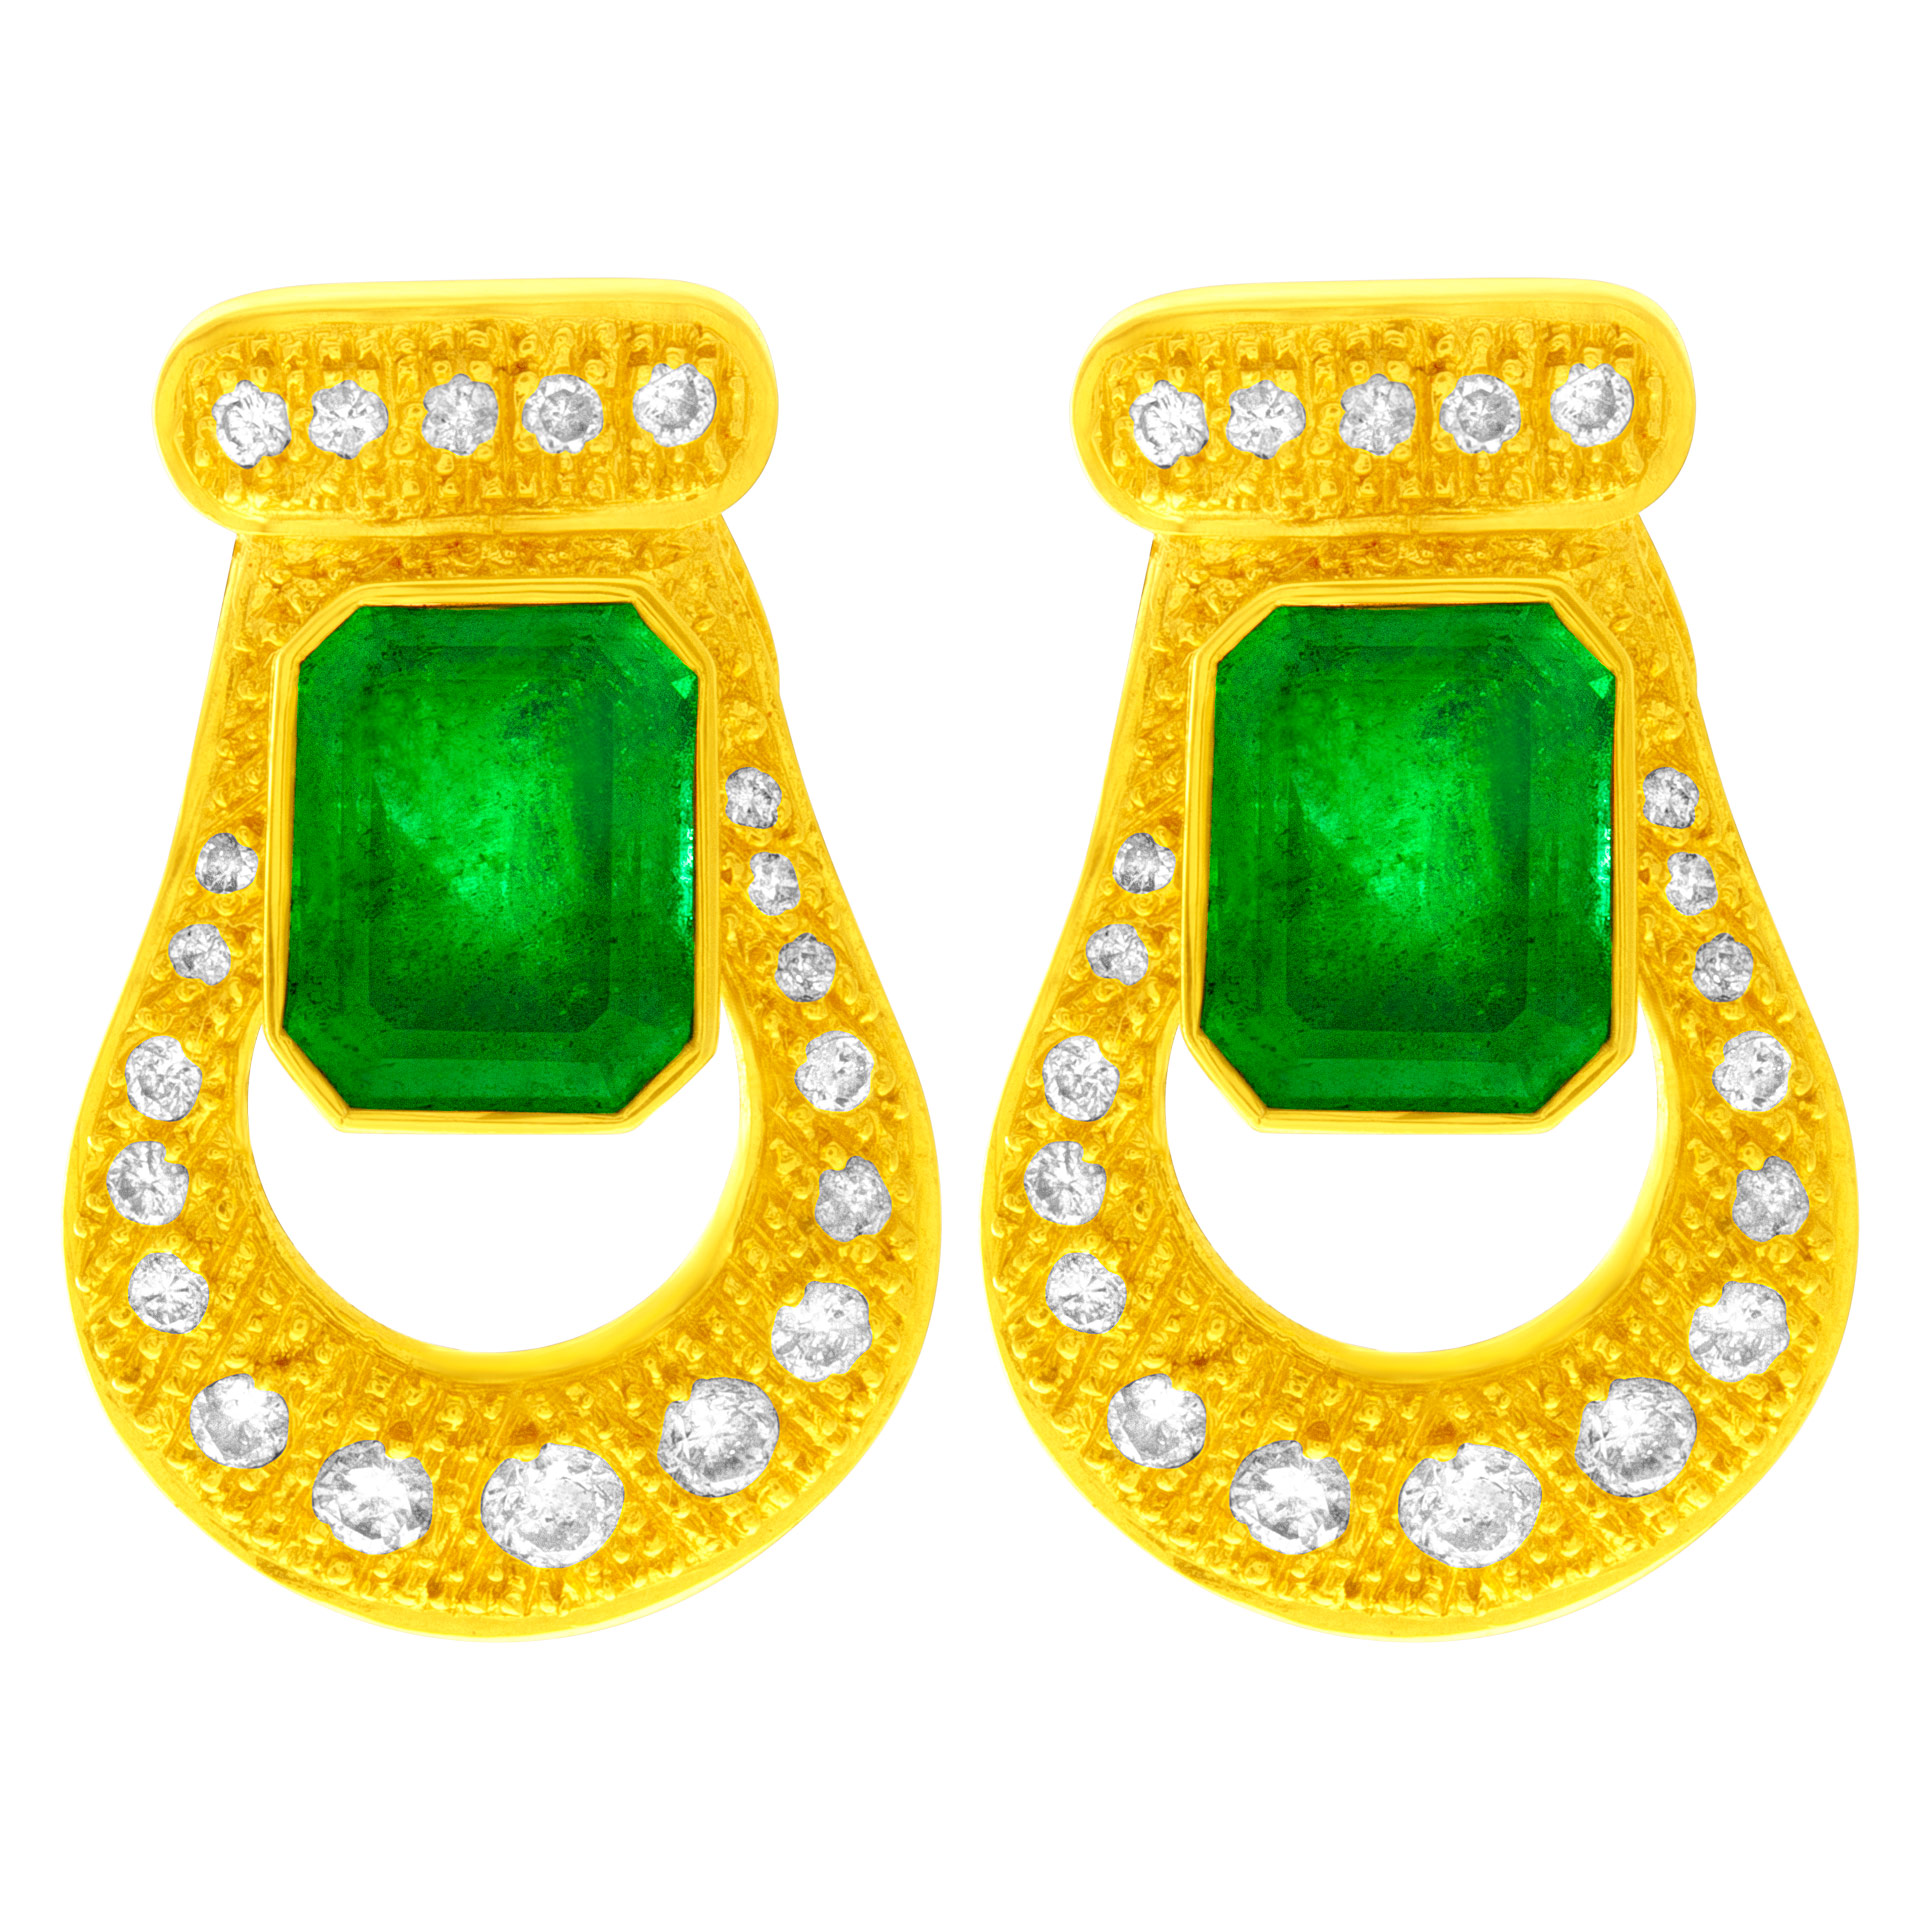 Emerald earrings with diamond accents in 18k. 5cts in Emeralds, 1ct in Diamonds